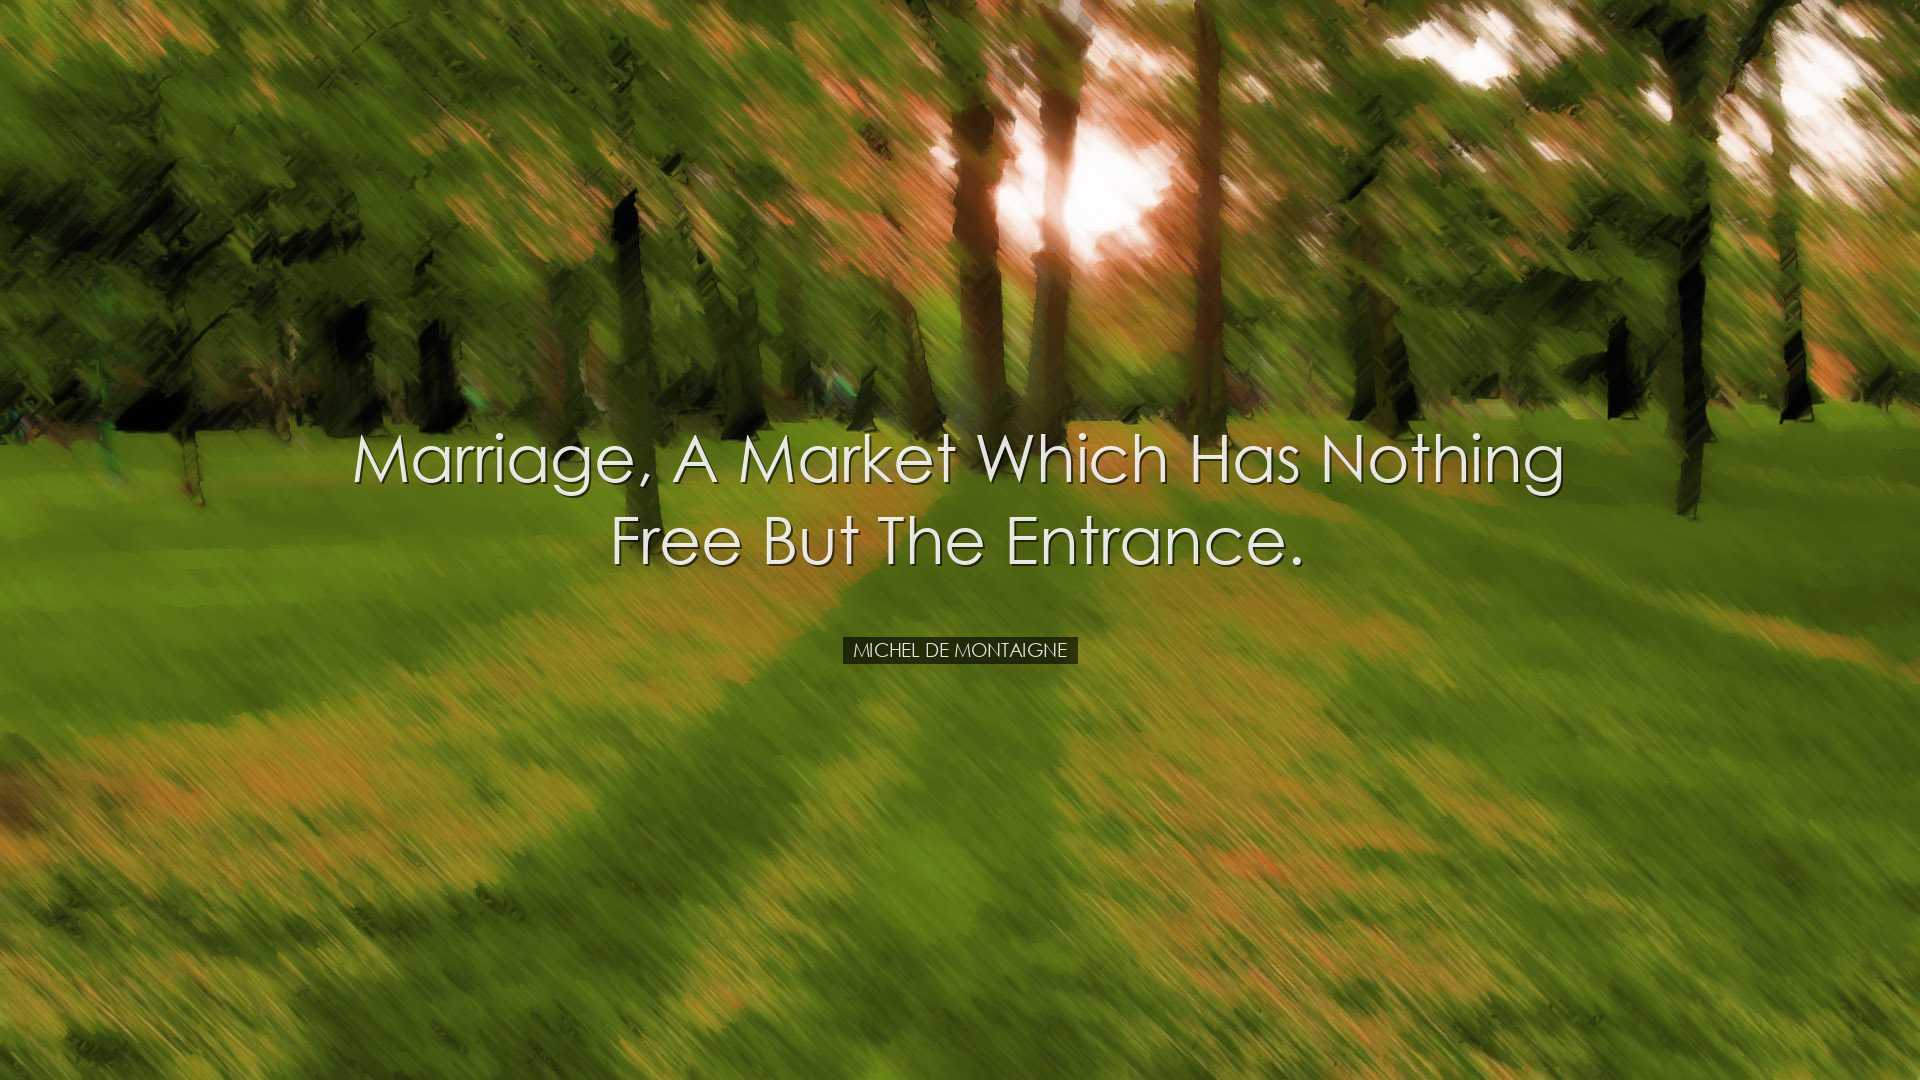 Marriage, a market which has nothing free but the entrance. - Mich